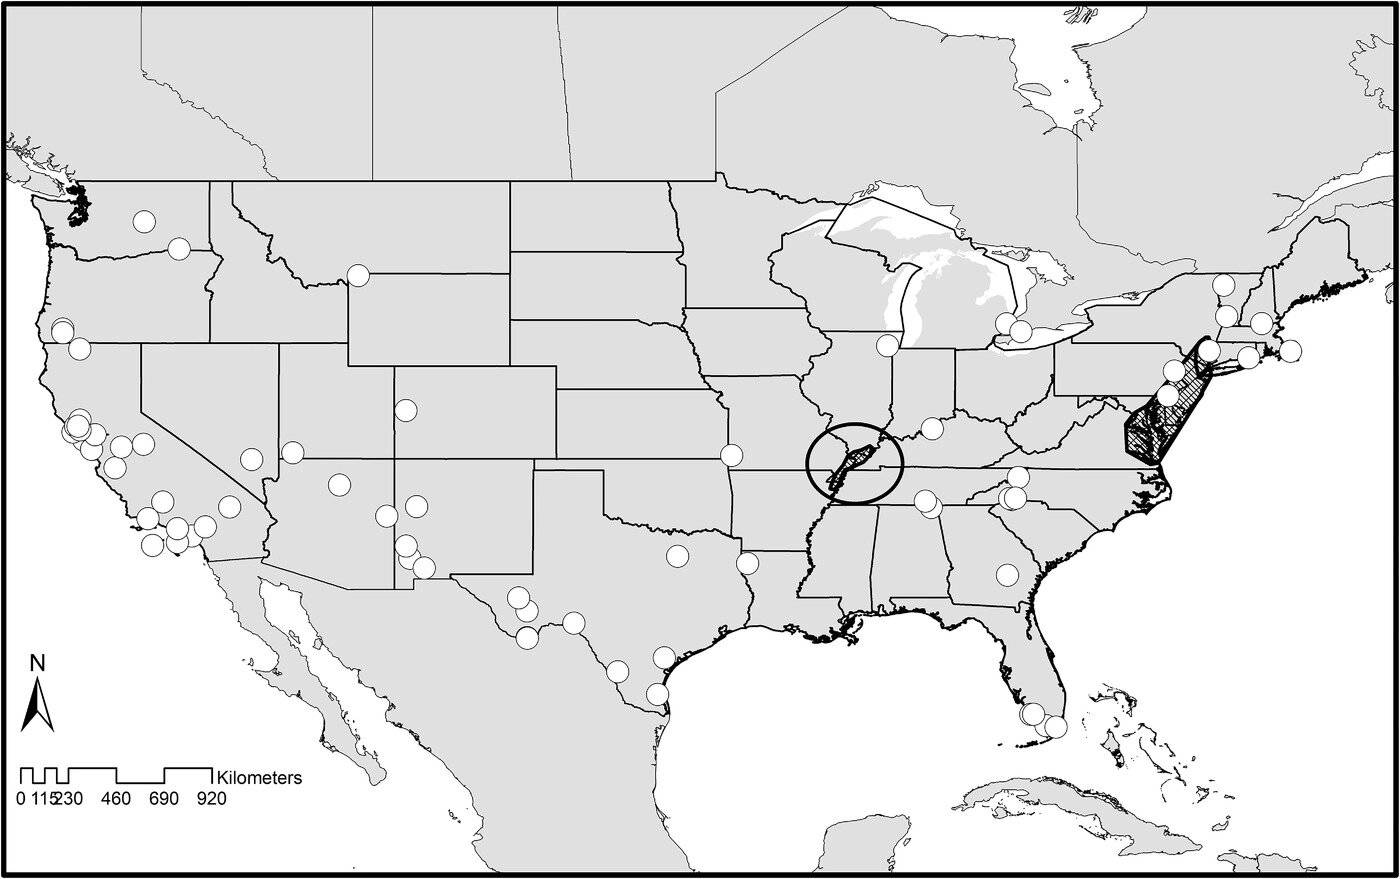 Contributed by the Society for Conservation Biology 
A map showing the locations where plants have gone extinct in the U.S. and Canada since European settlers arrived.